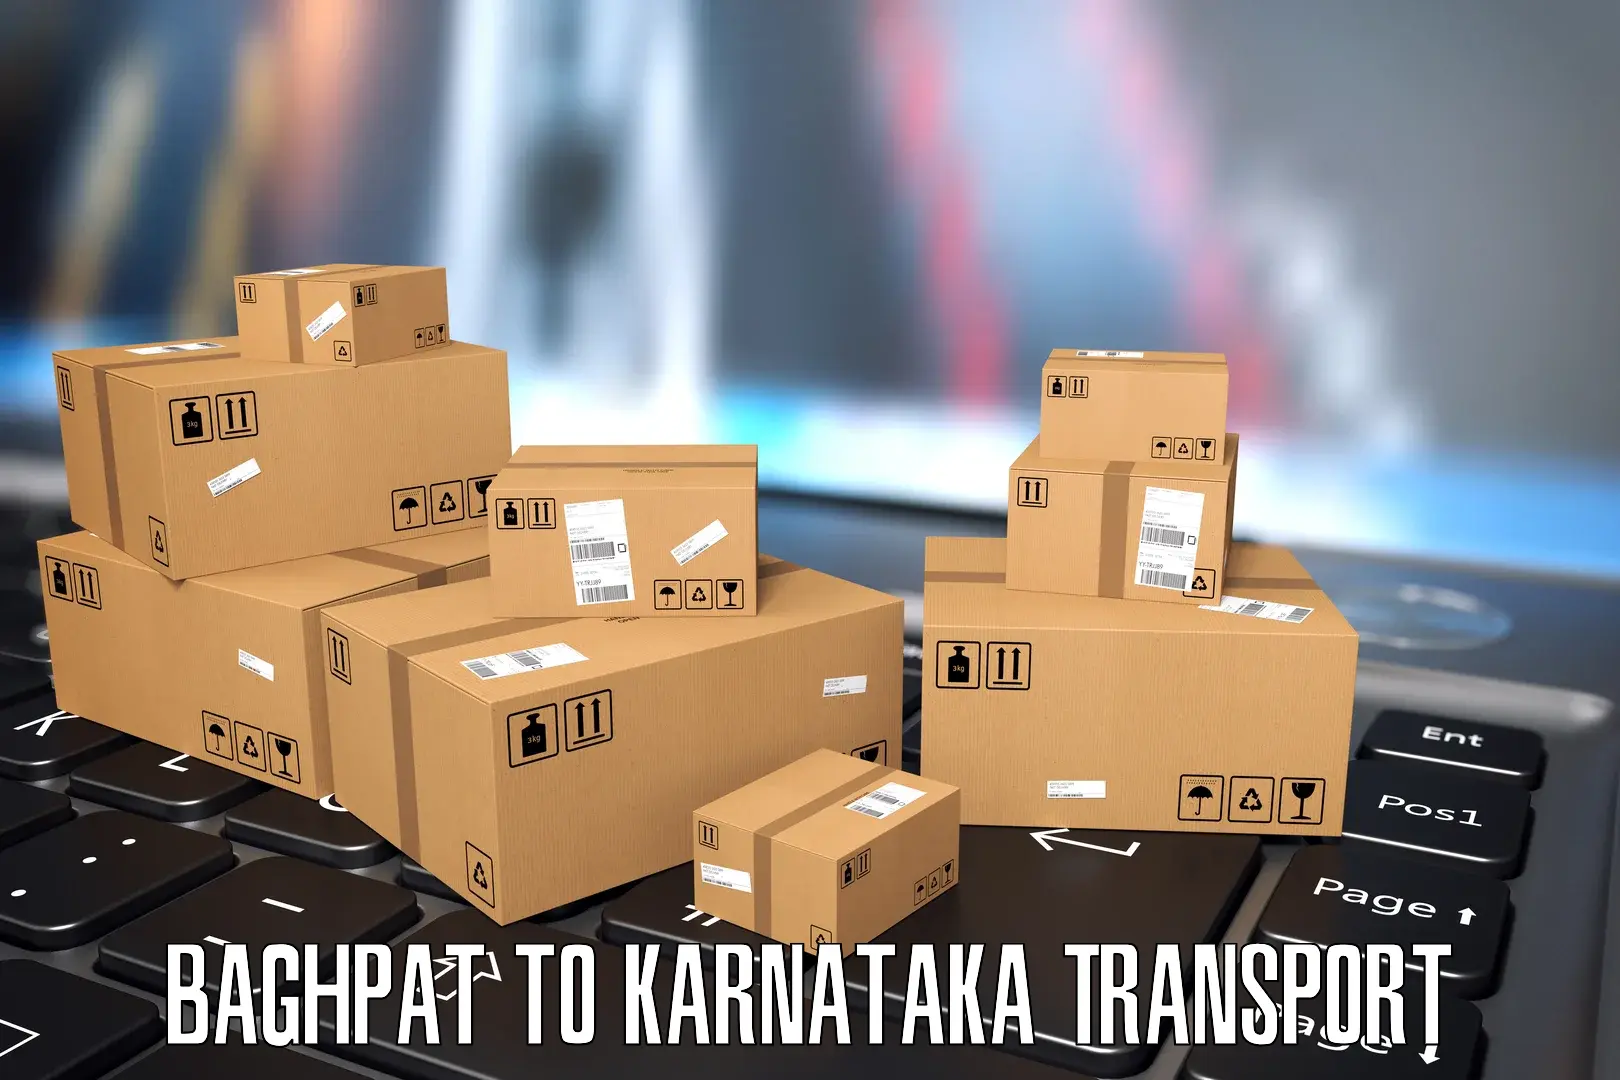 Commercial transport service Baghpat to Devanahalli